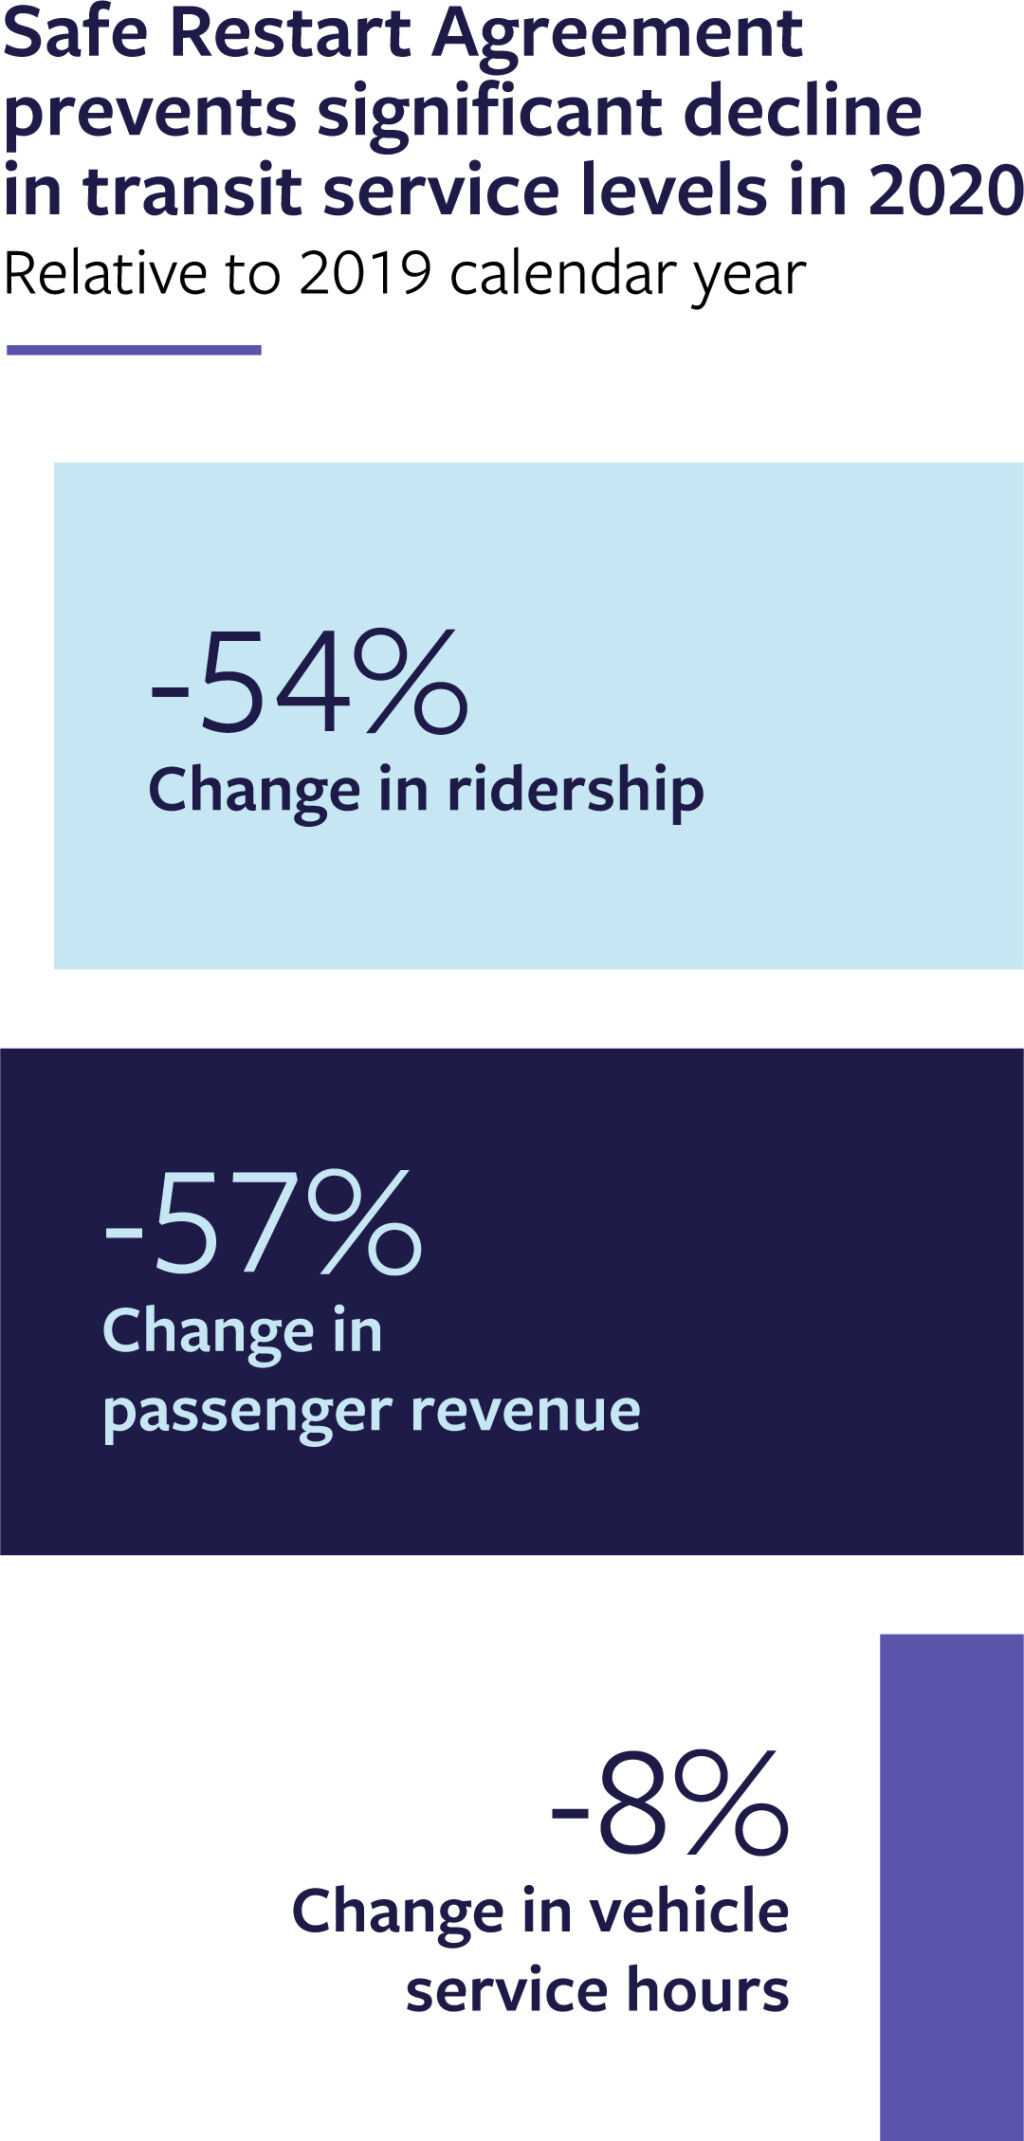 Chart showing Safe Restart Agreement prevents signiﬁcant decline in transit service levels in 2020, Relative to calendar year 2019.  -54% Change in ridership;   -57% Change in  passenger revenue; -8% Change in vehicle service hours